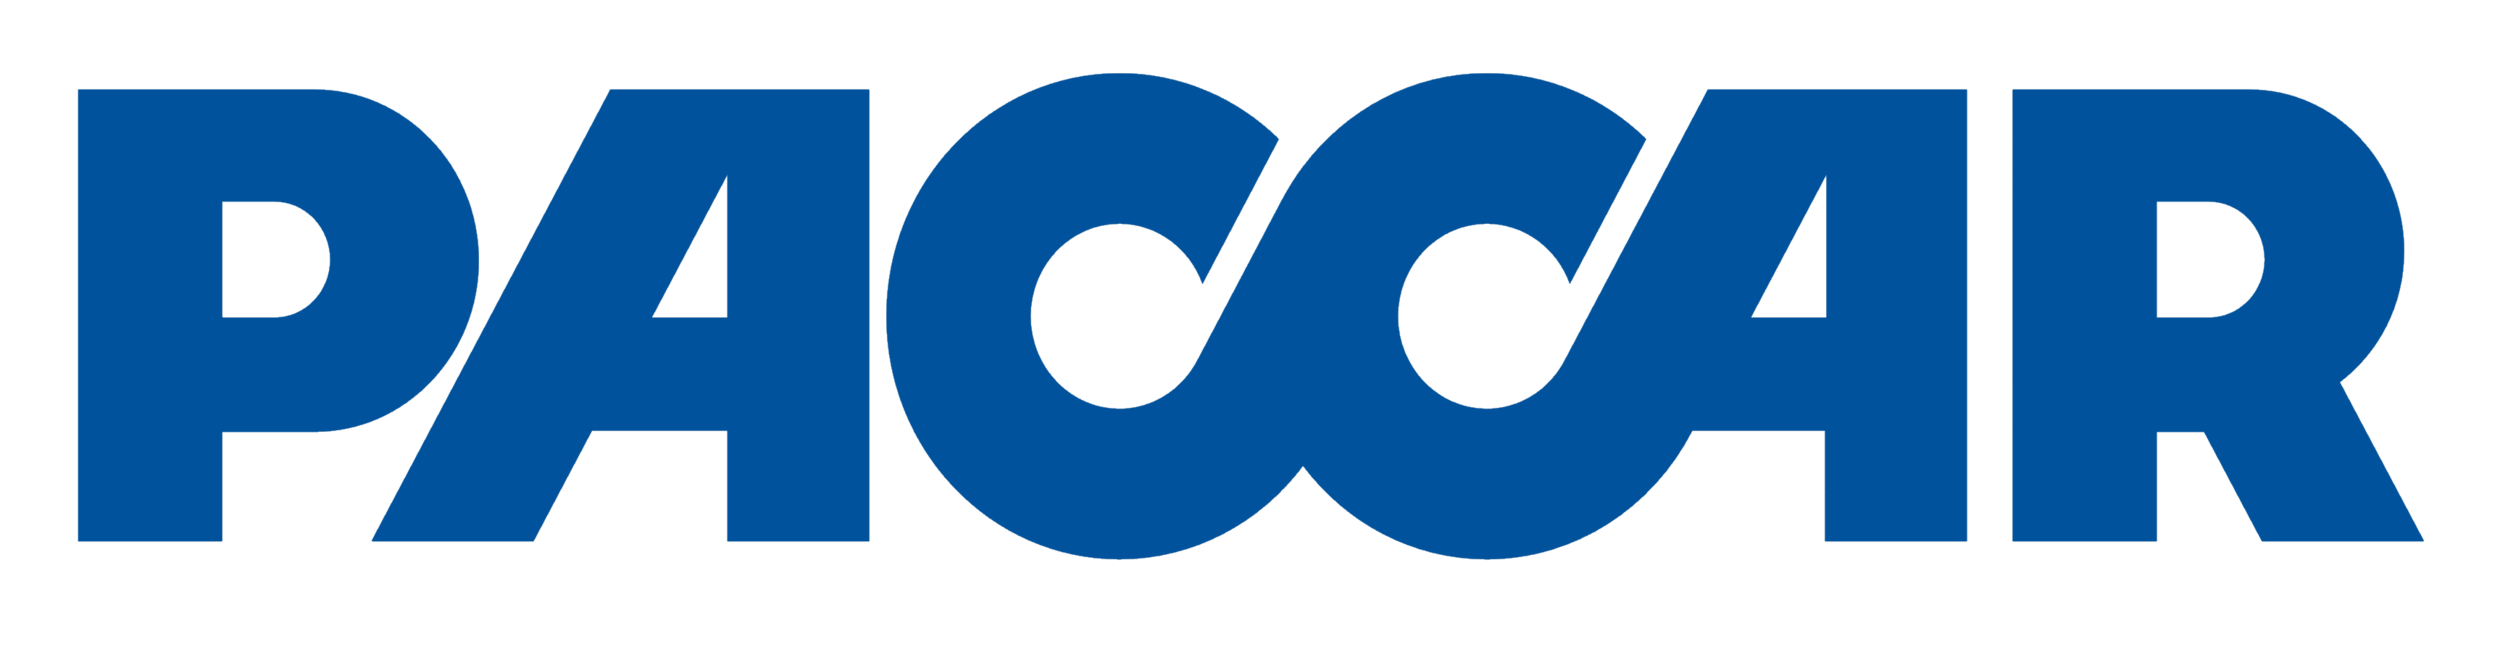 PACCAR_logo_blue.png